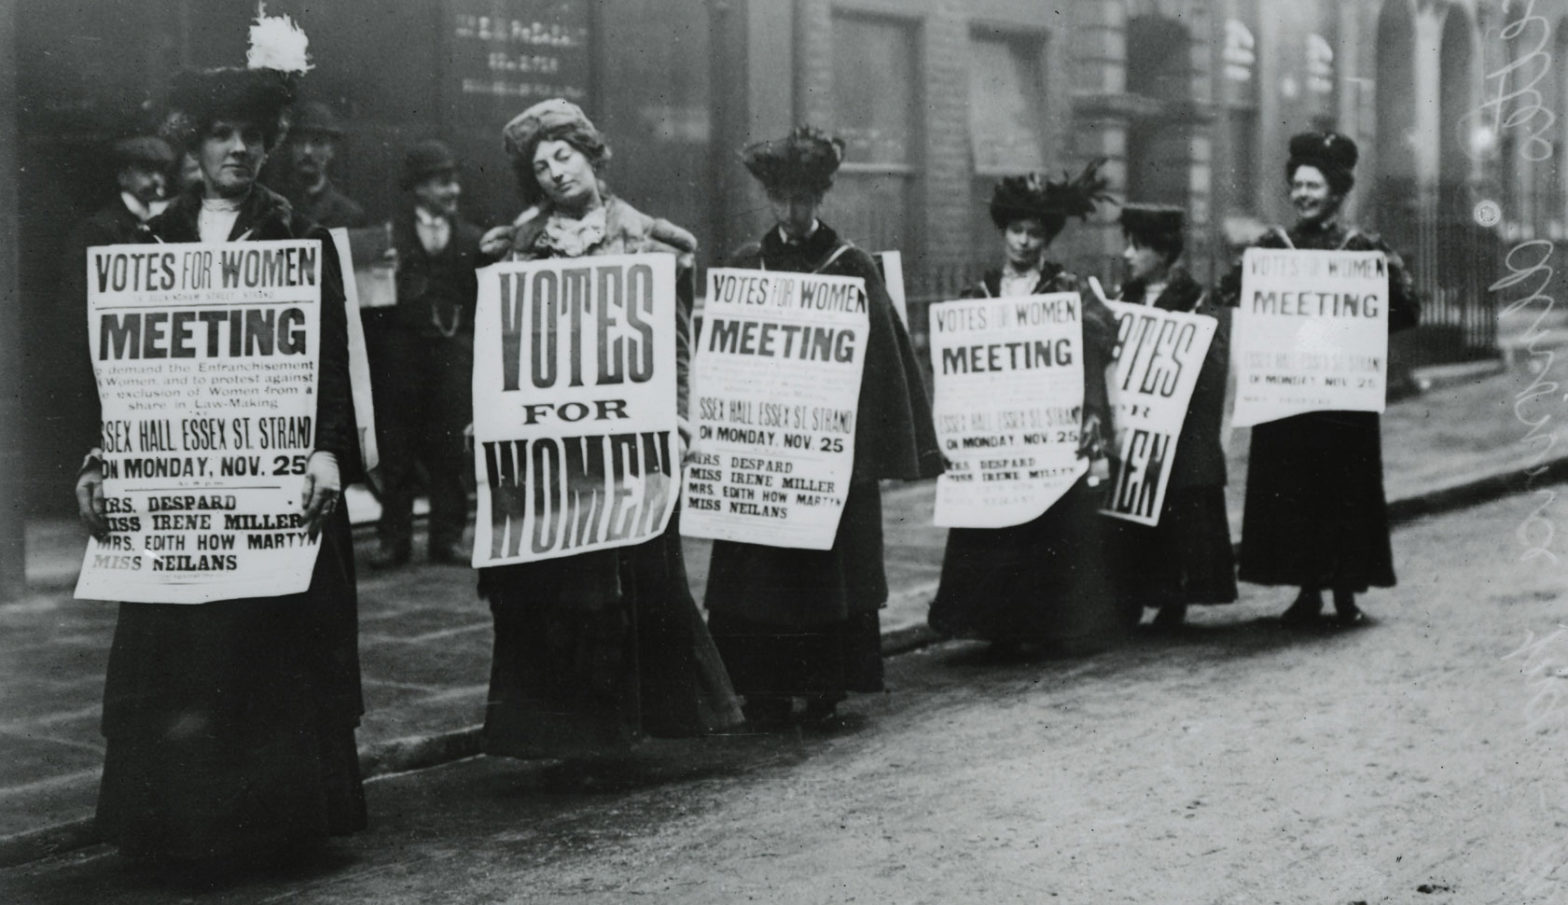 women picketing for right to vote in London